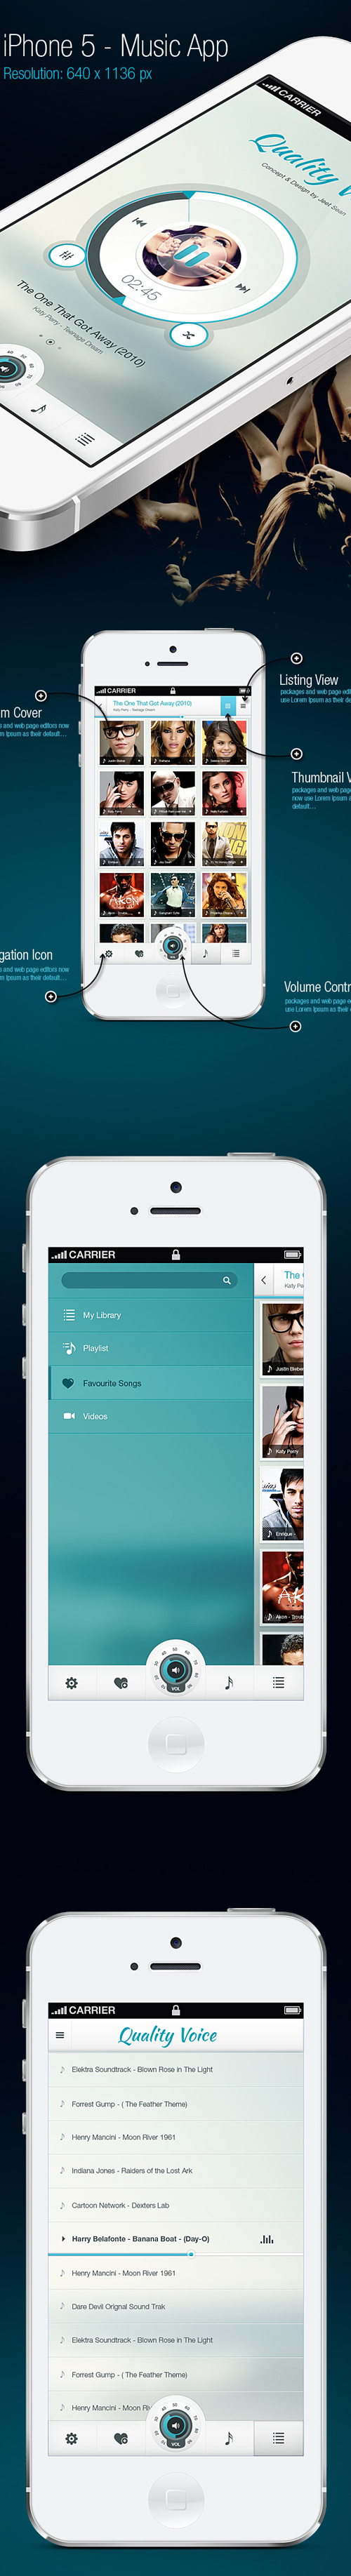 Quality Voice - Mobile App UI Designs and Concepts for Inspiration